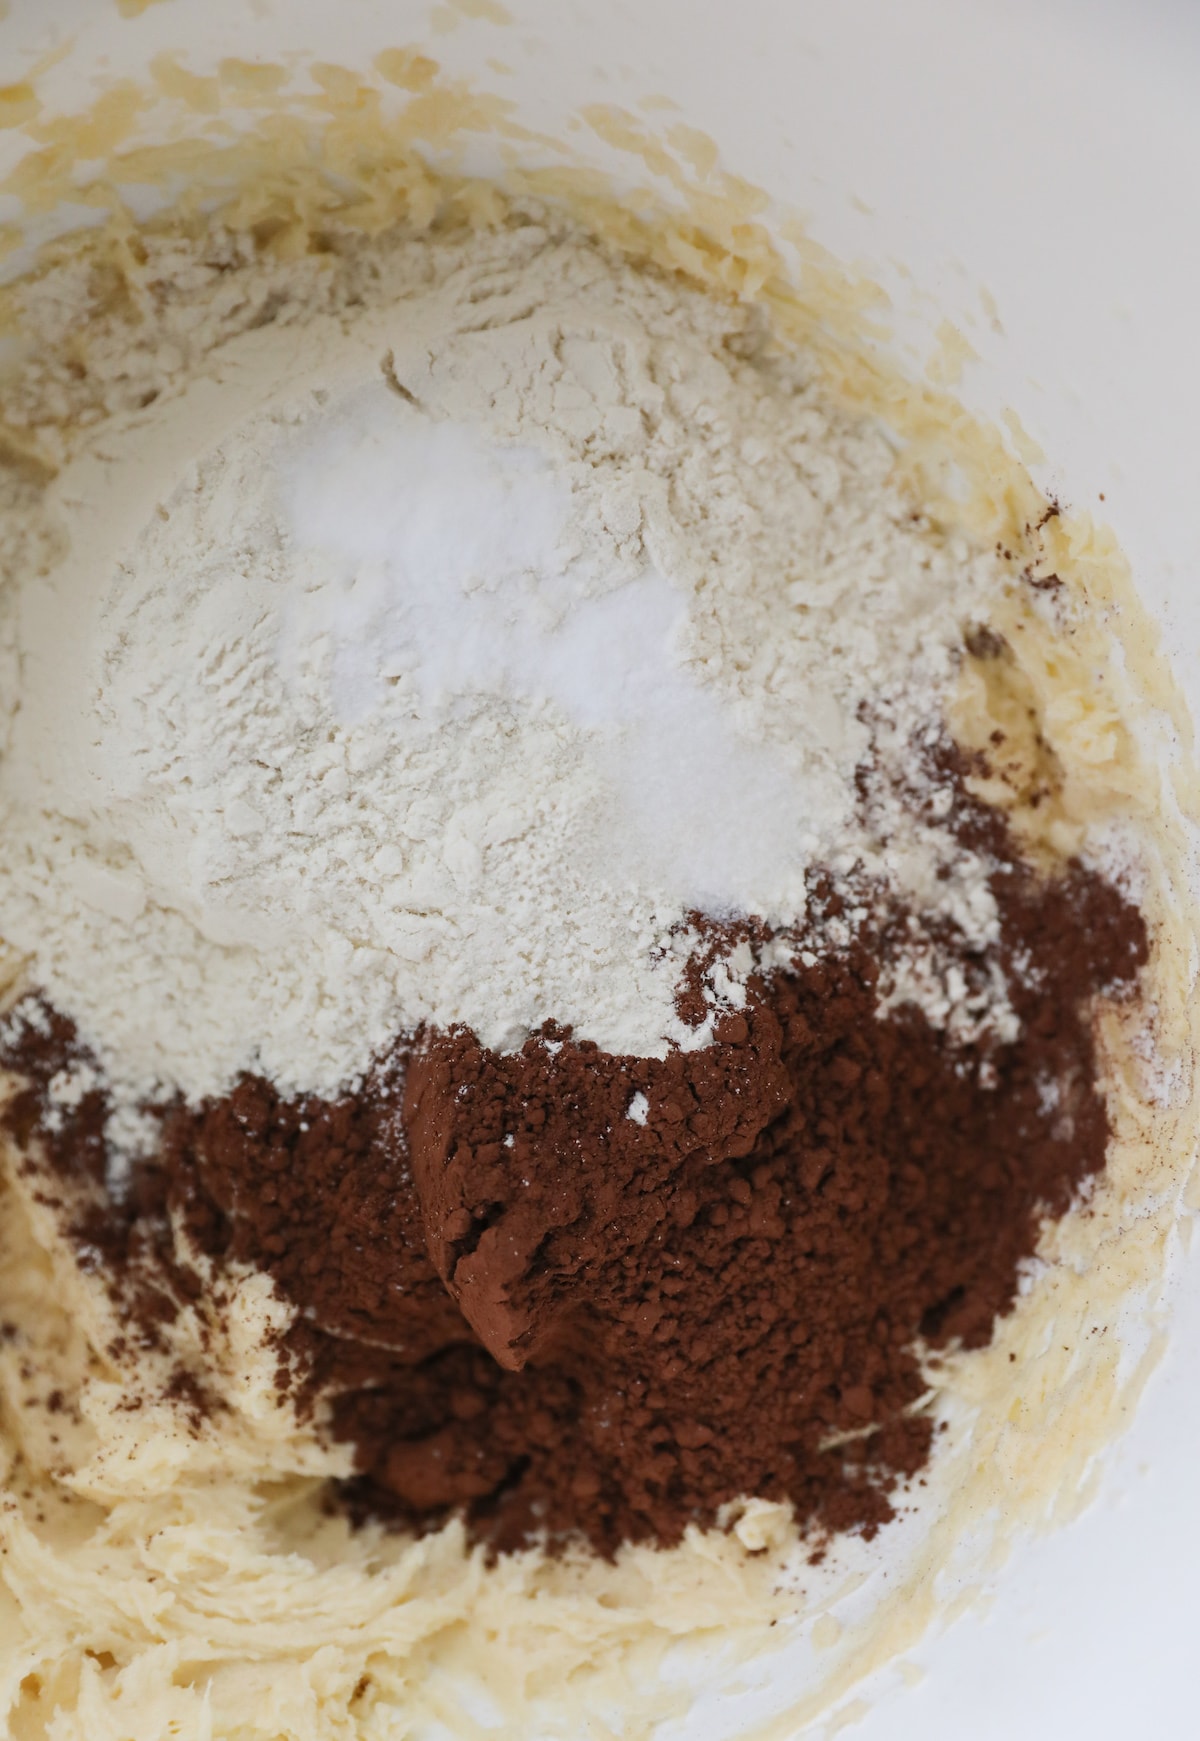 dry ingredients added to cookie dough